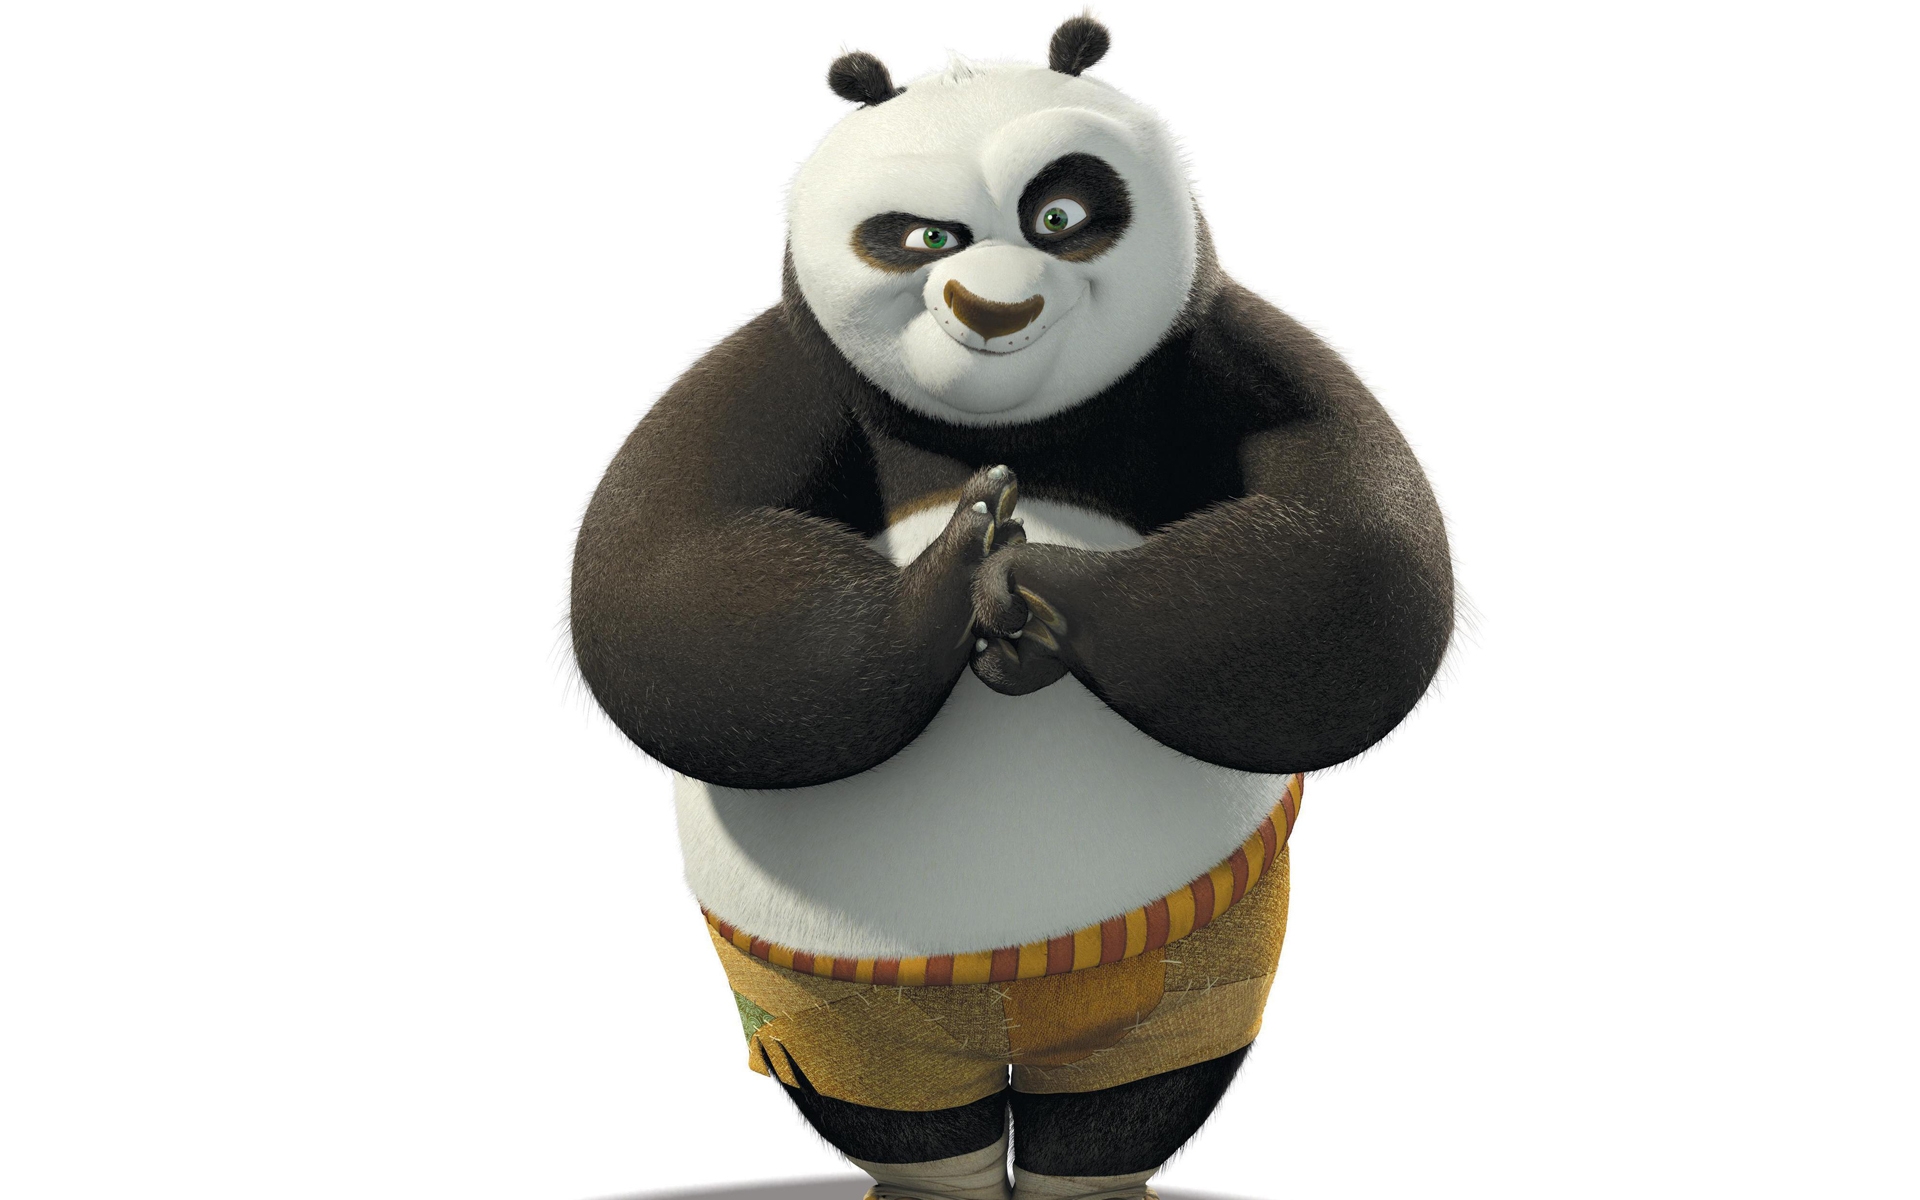 40+ Kung Fu Panda HD Wallpapers and Backgrounds